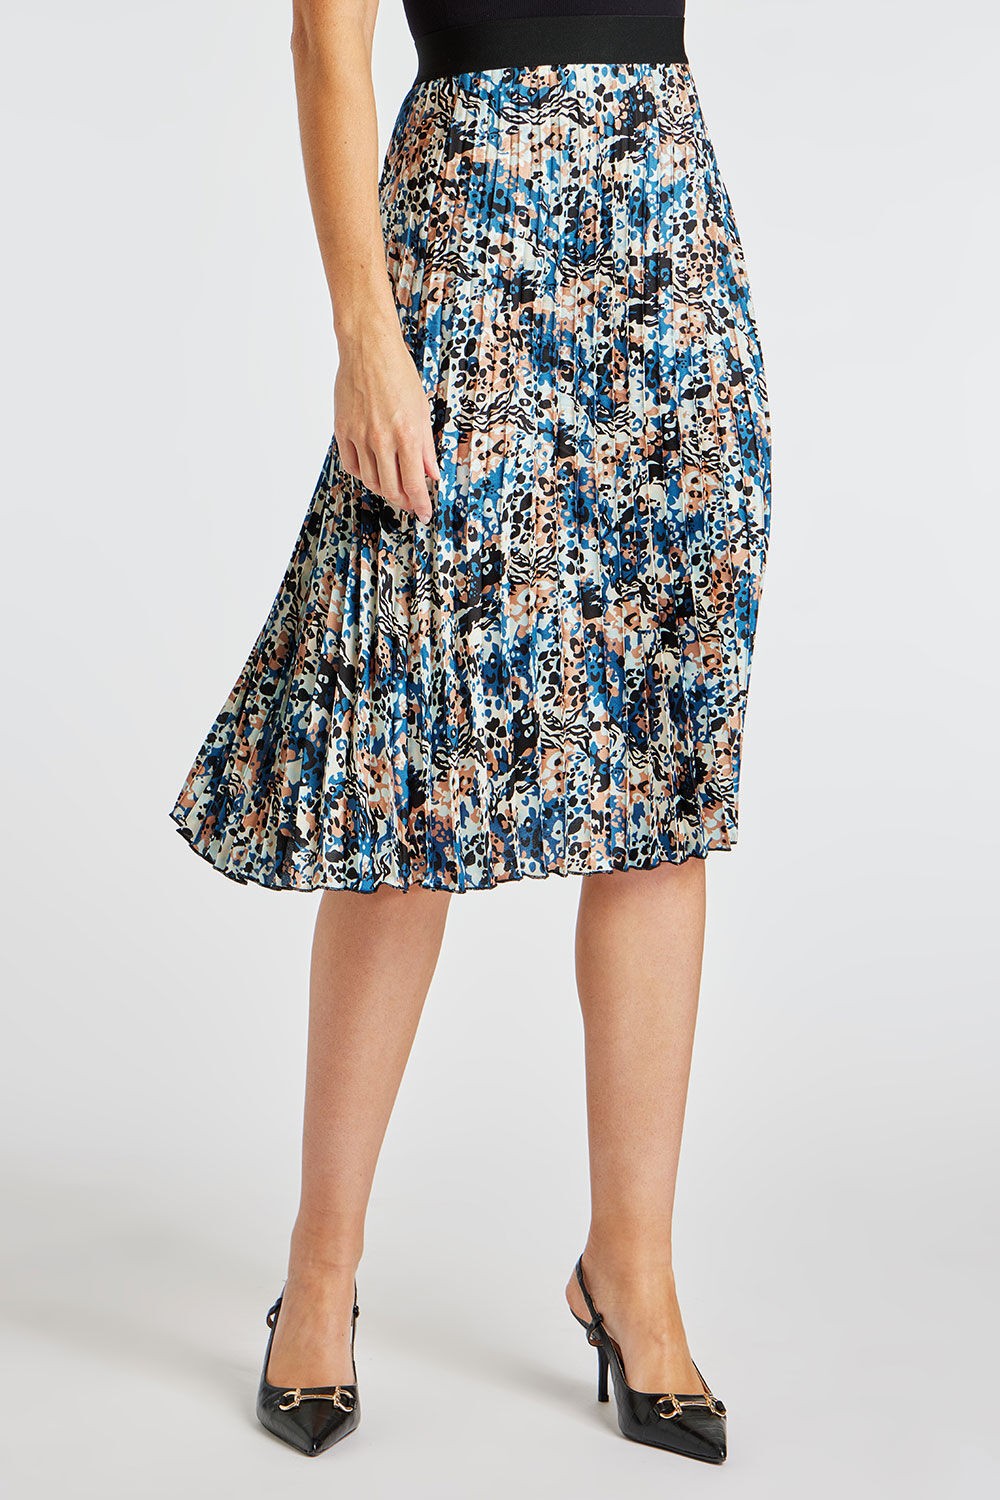 Bonmarche Brown Animal Patchwork Print Elasticated Pleated Skirt, Size: 24